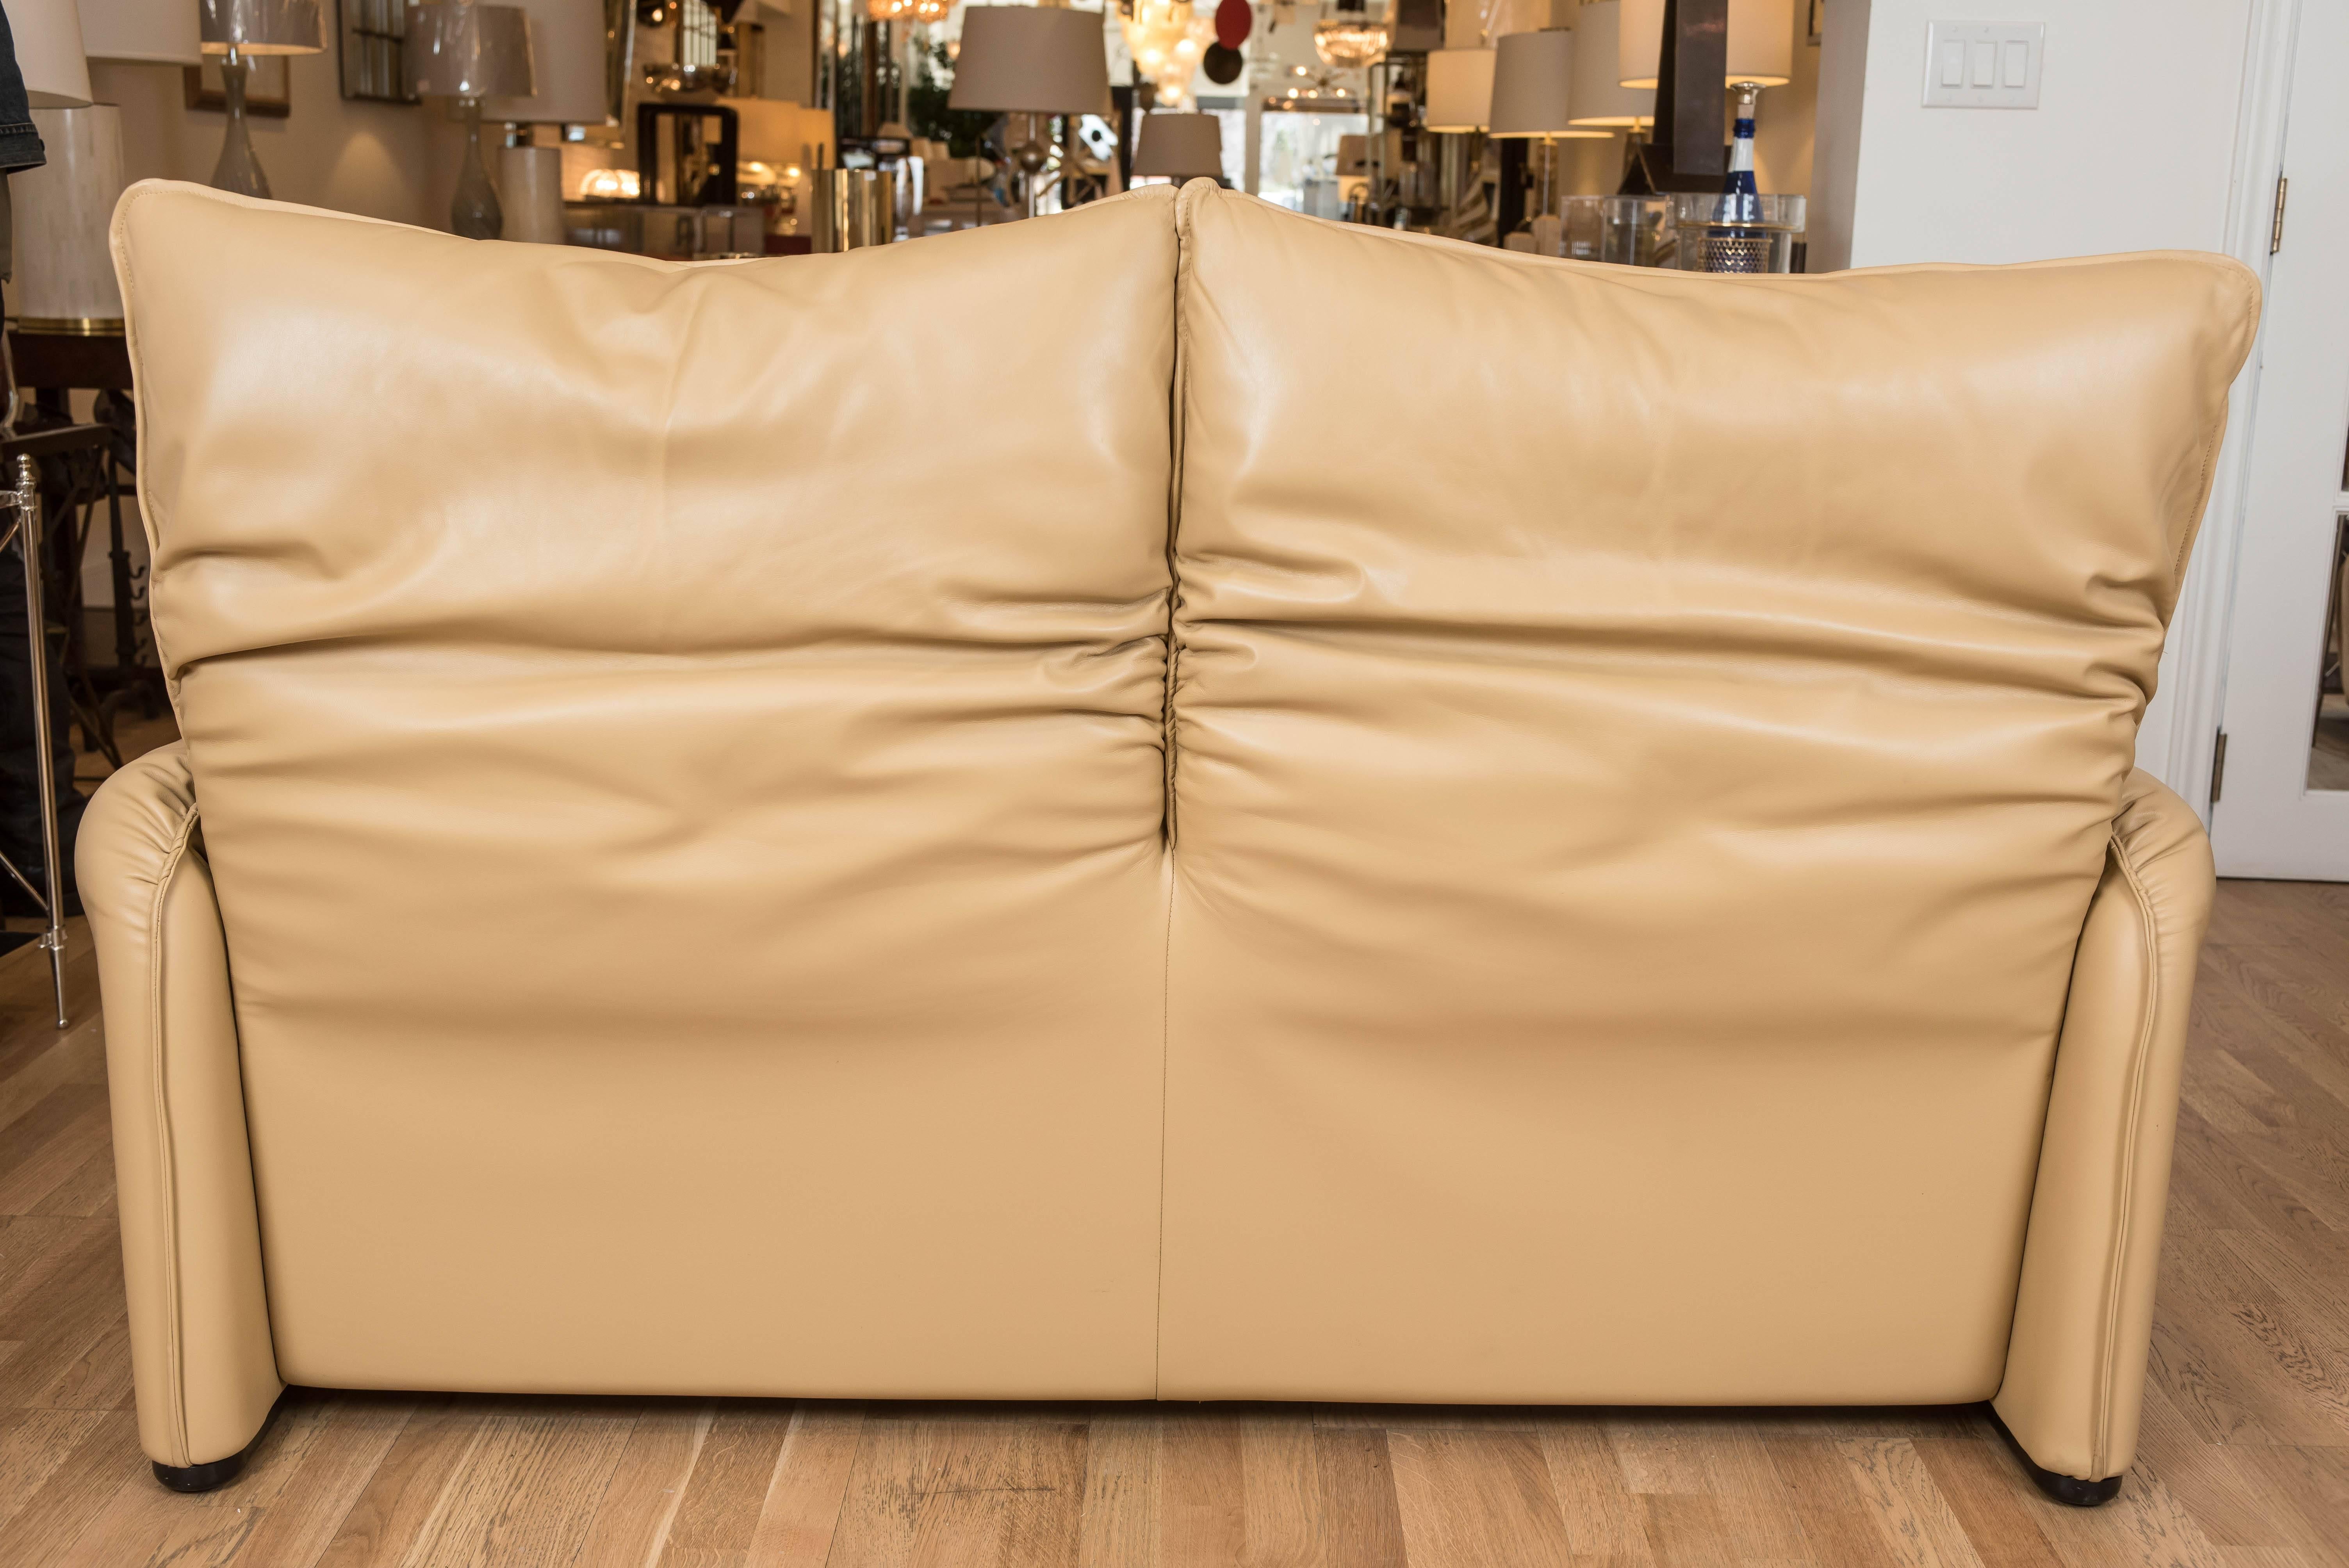 Italian Maralunga Two-Seat Sofa in Leather by Vico Magistretti for Cassina of Italy